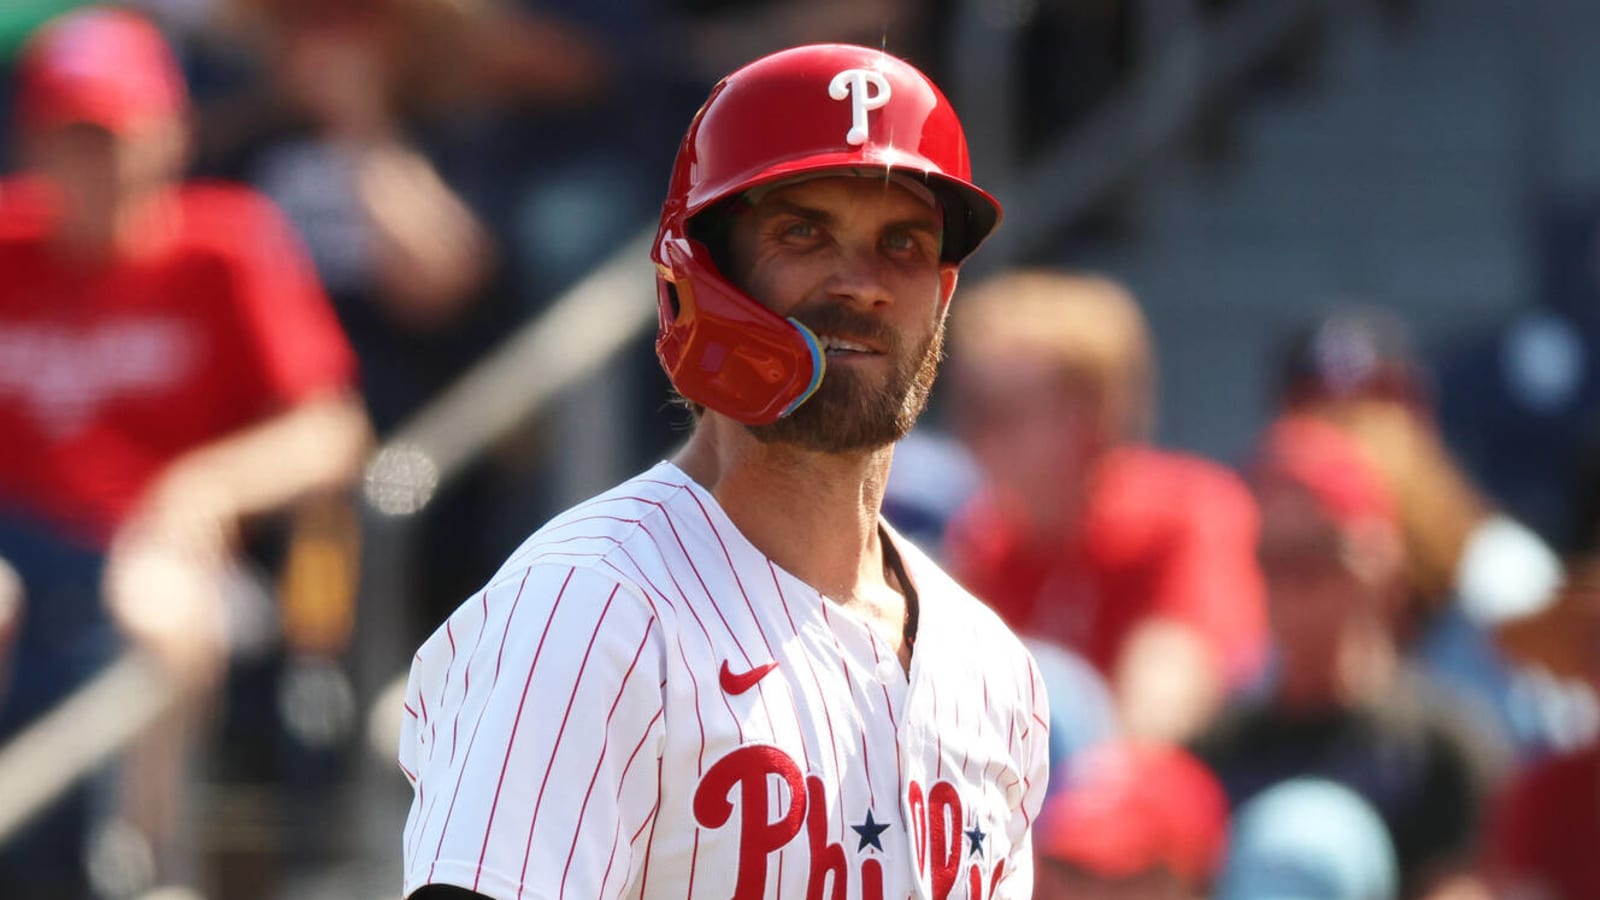 Bryce Harper announced big personal news before Opening Day